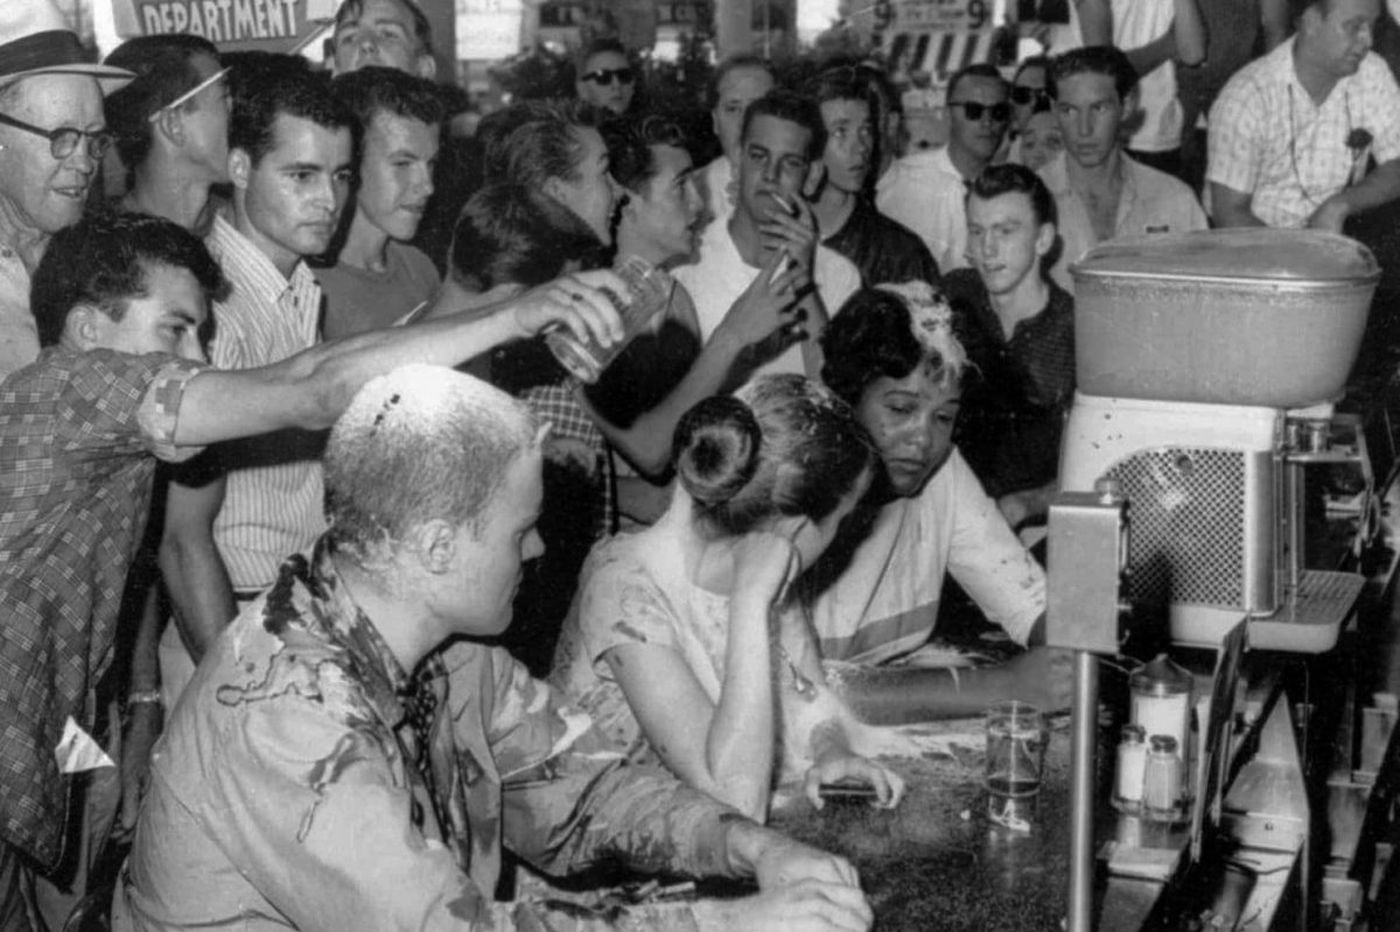 Before video of a Starbucks arrest, images of lunch counter sit-ins helped launch a ...